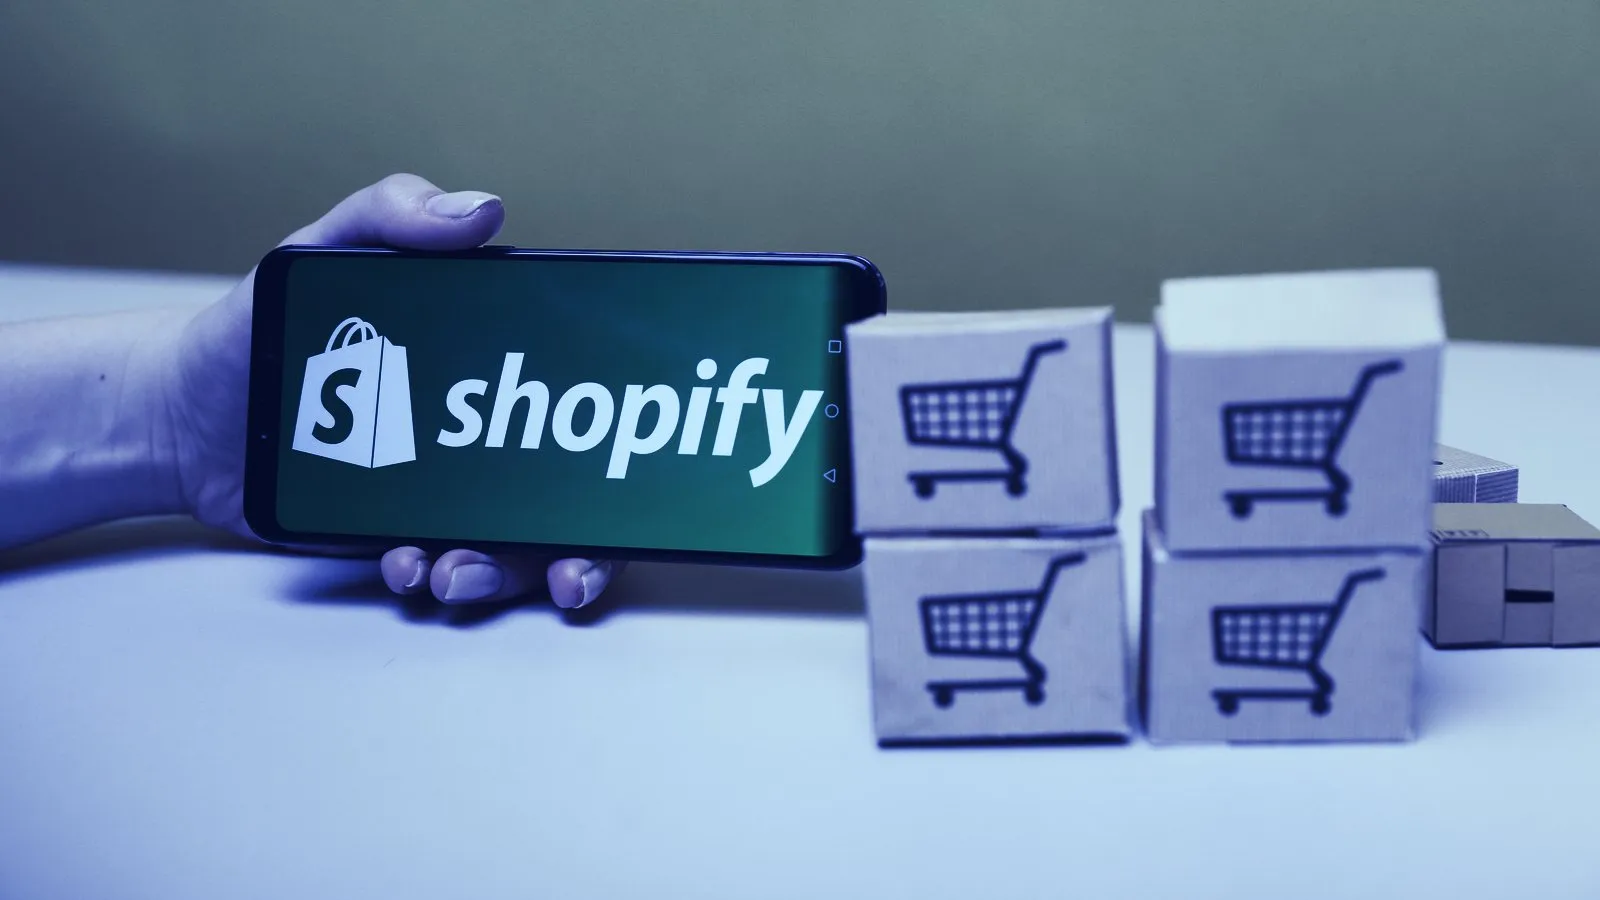 Shares in crypto-friendly Shopify have soared amid the coronavirus. Image: Shutterstock